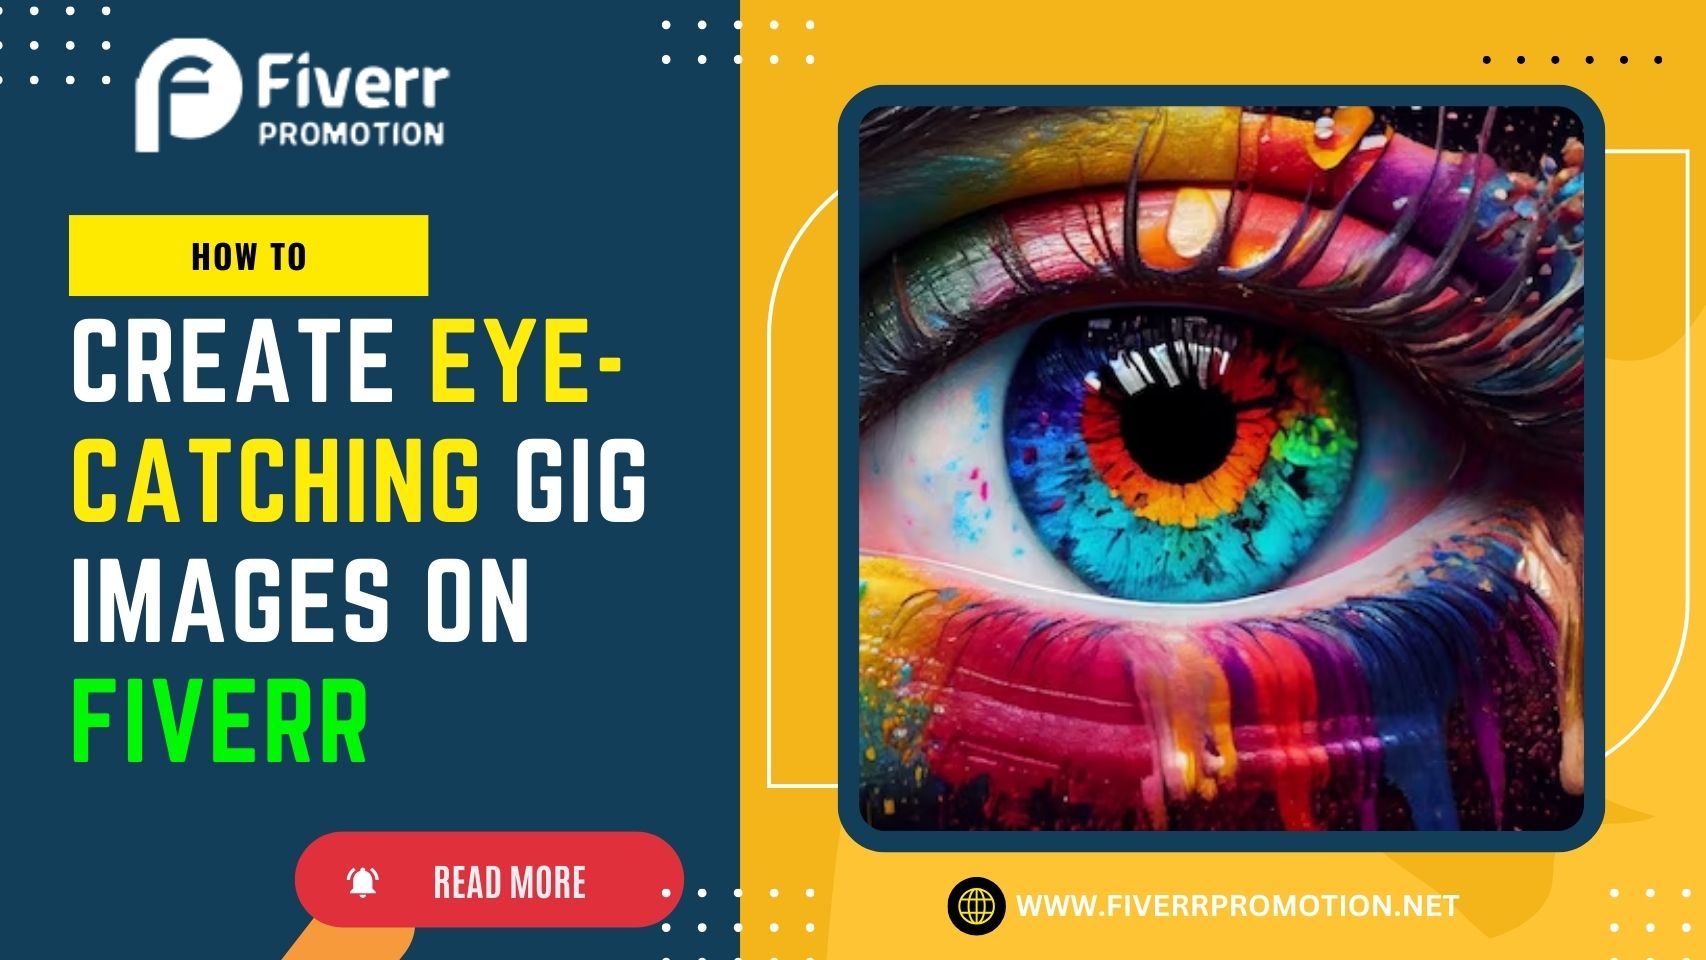  How to Create Eye-Catching Gig Images on Fiverr